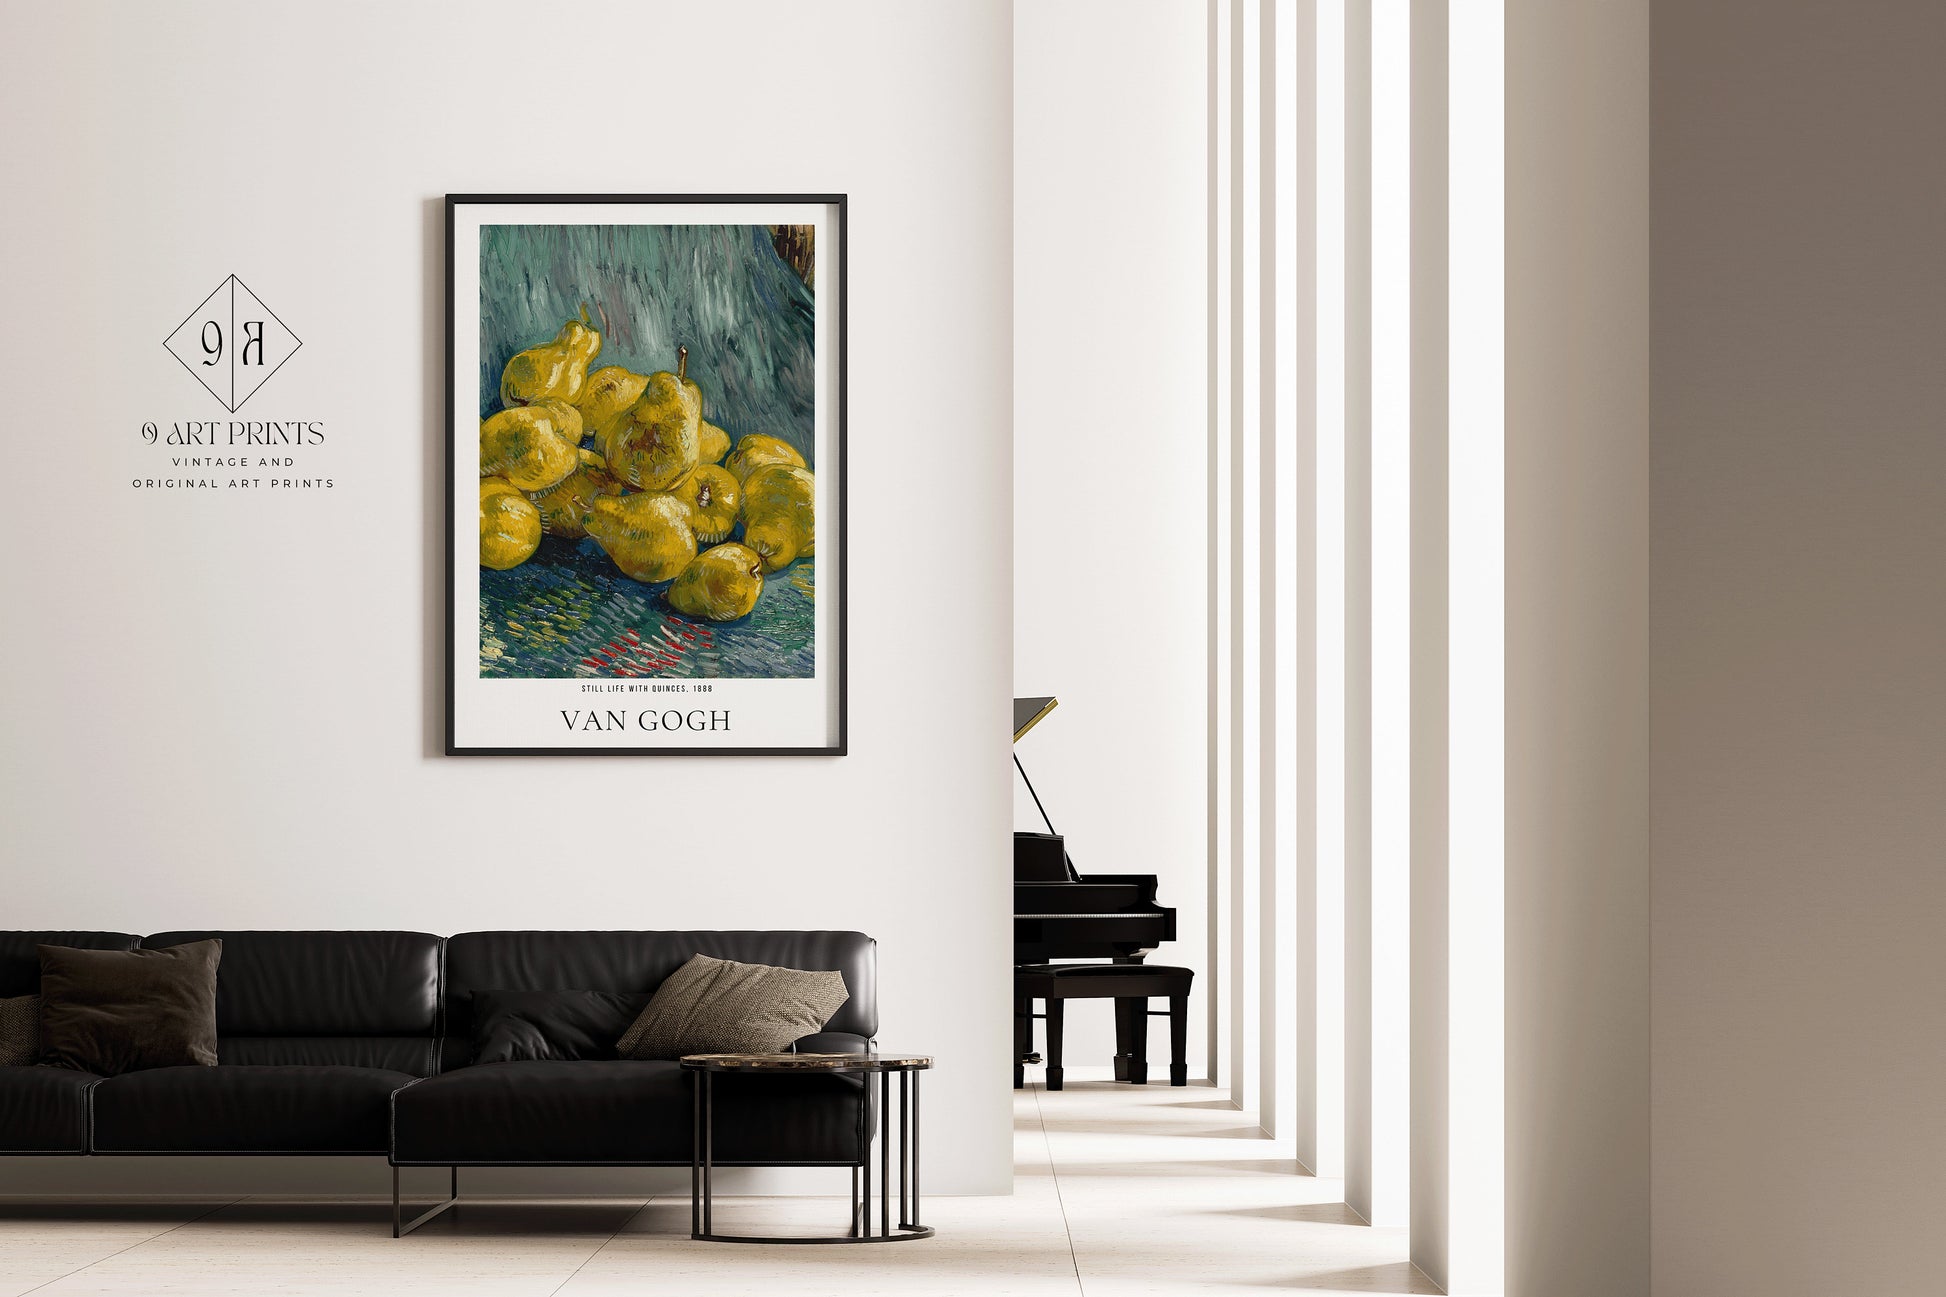 Van Gogh Still Life with Quinces Exhibition Museum Poster Fine Art Painting Vintage Famous Ready to hang Framed Home Office Decor Gift Idea